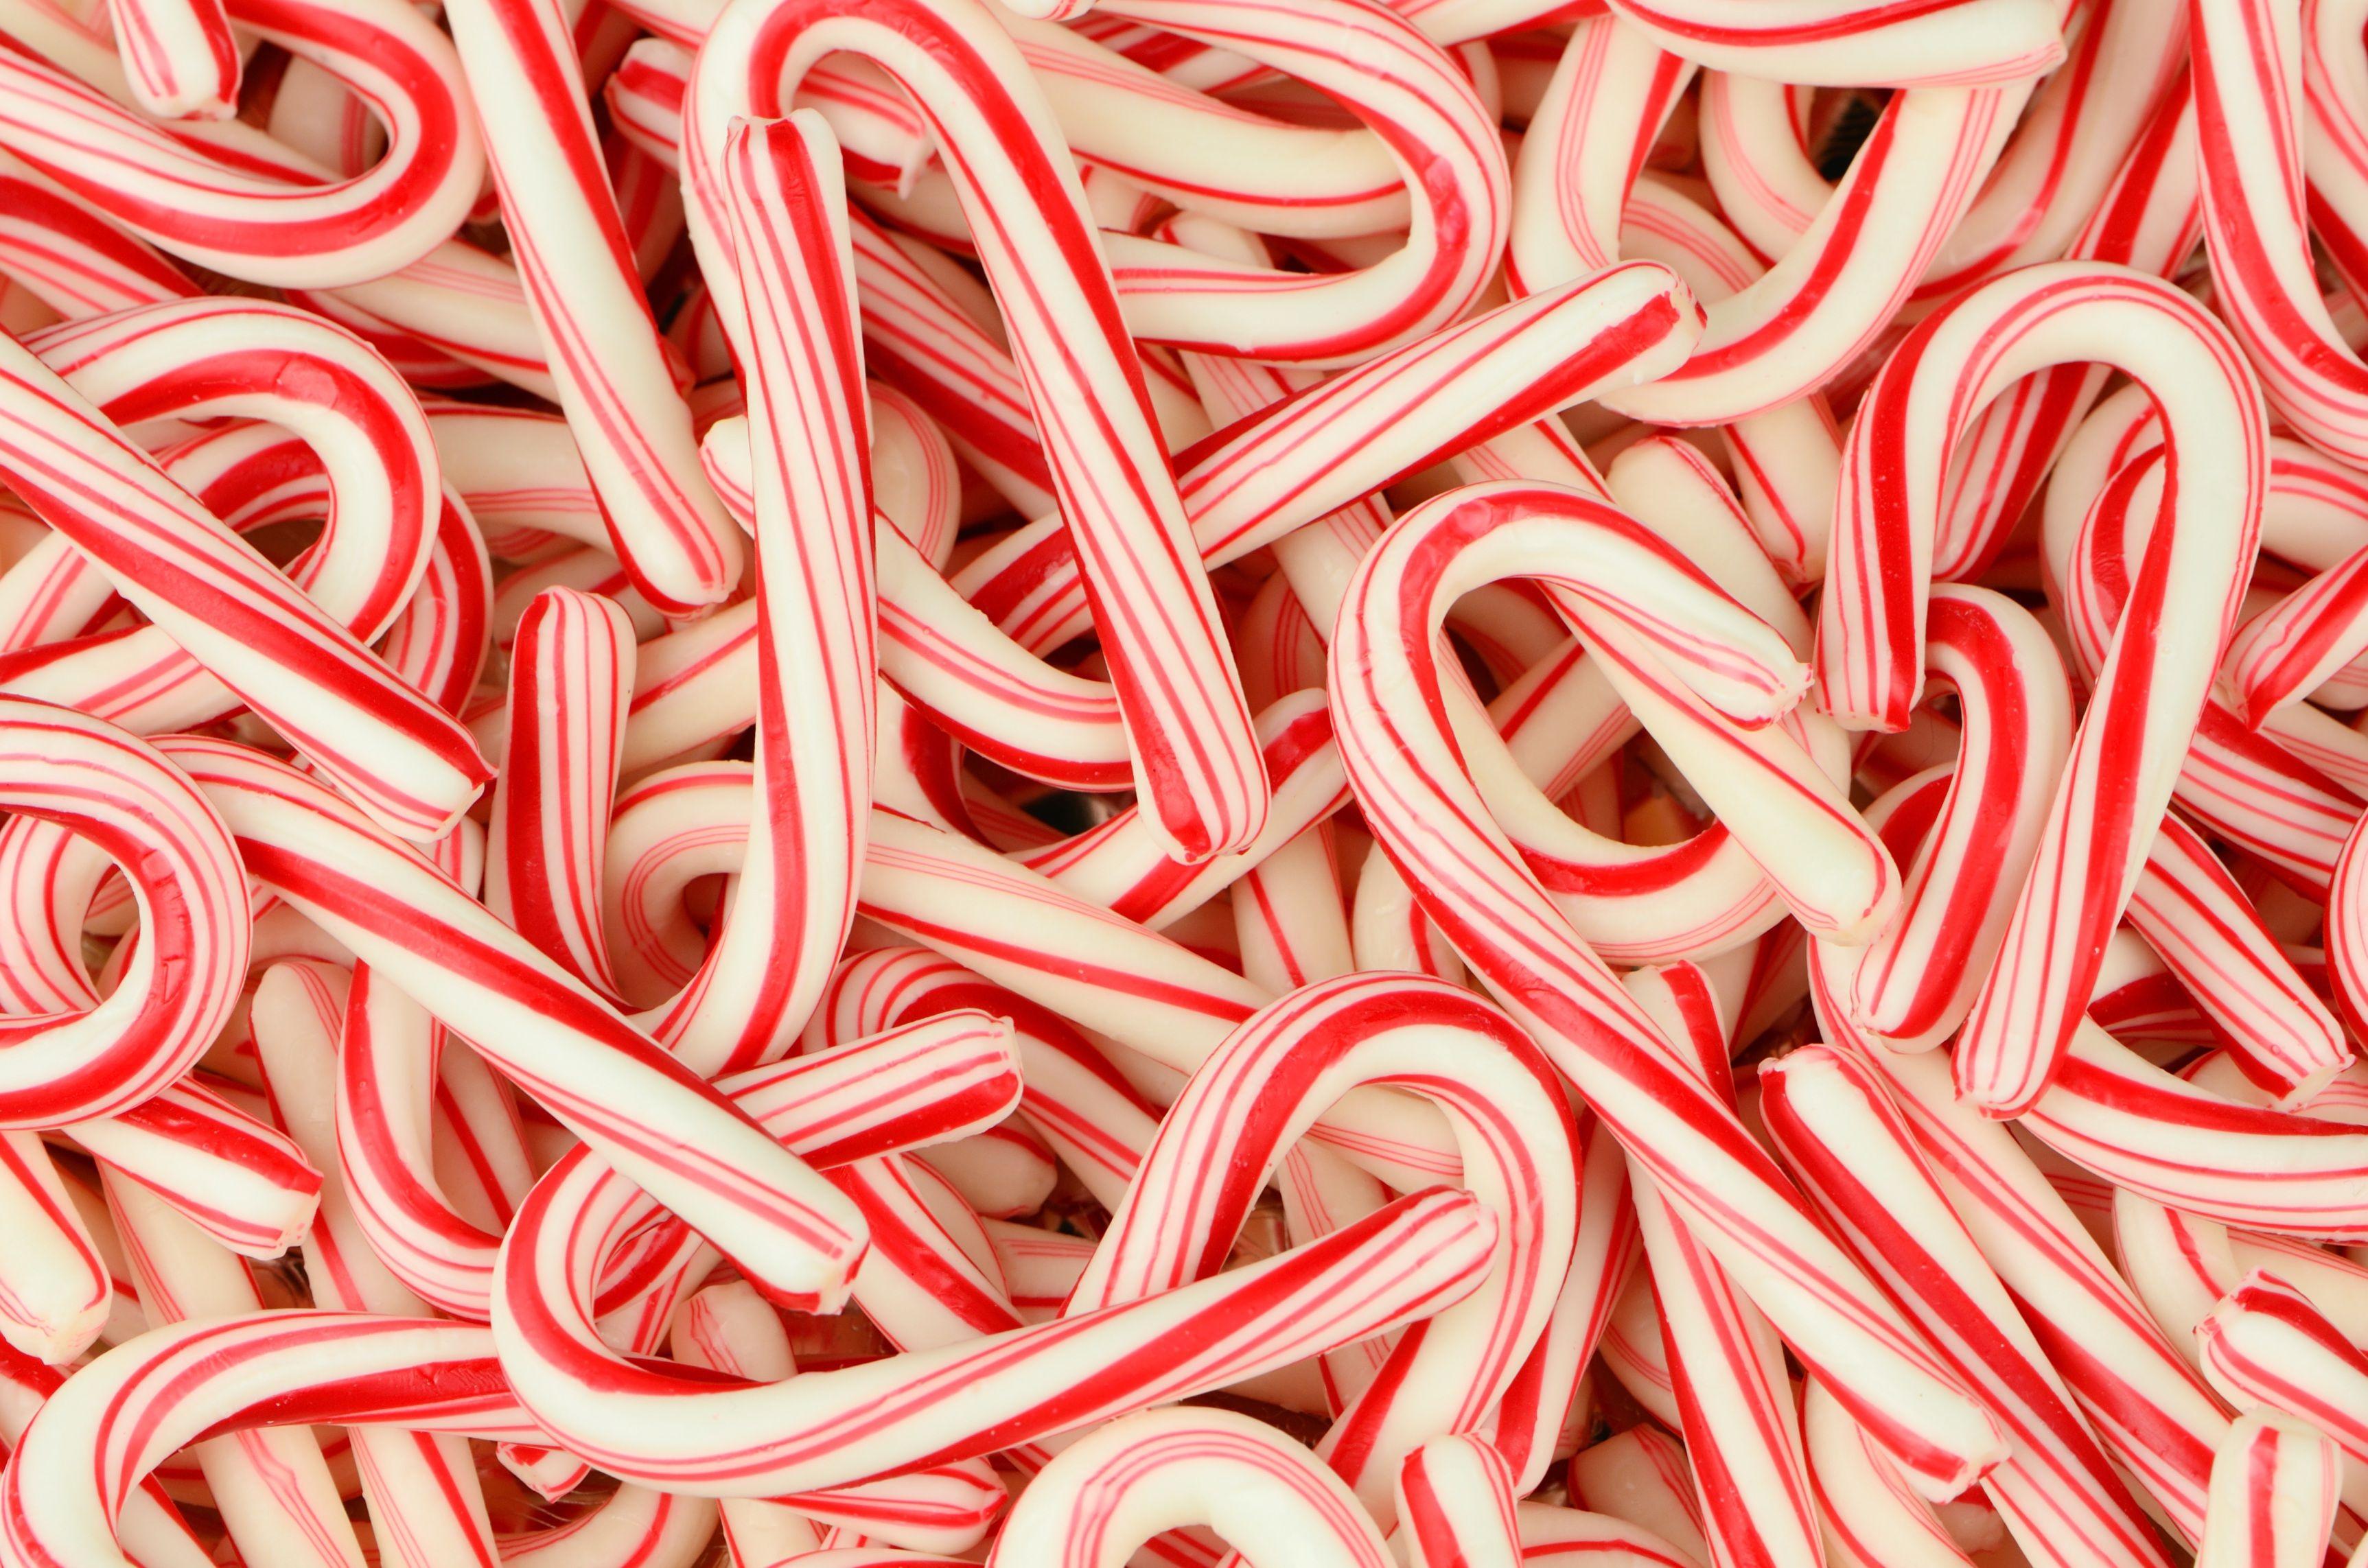 Candy Canes Wallpapers Pictures 52141 3450x2285 px ~ HDWallSource